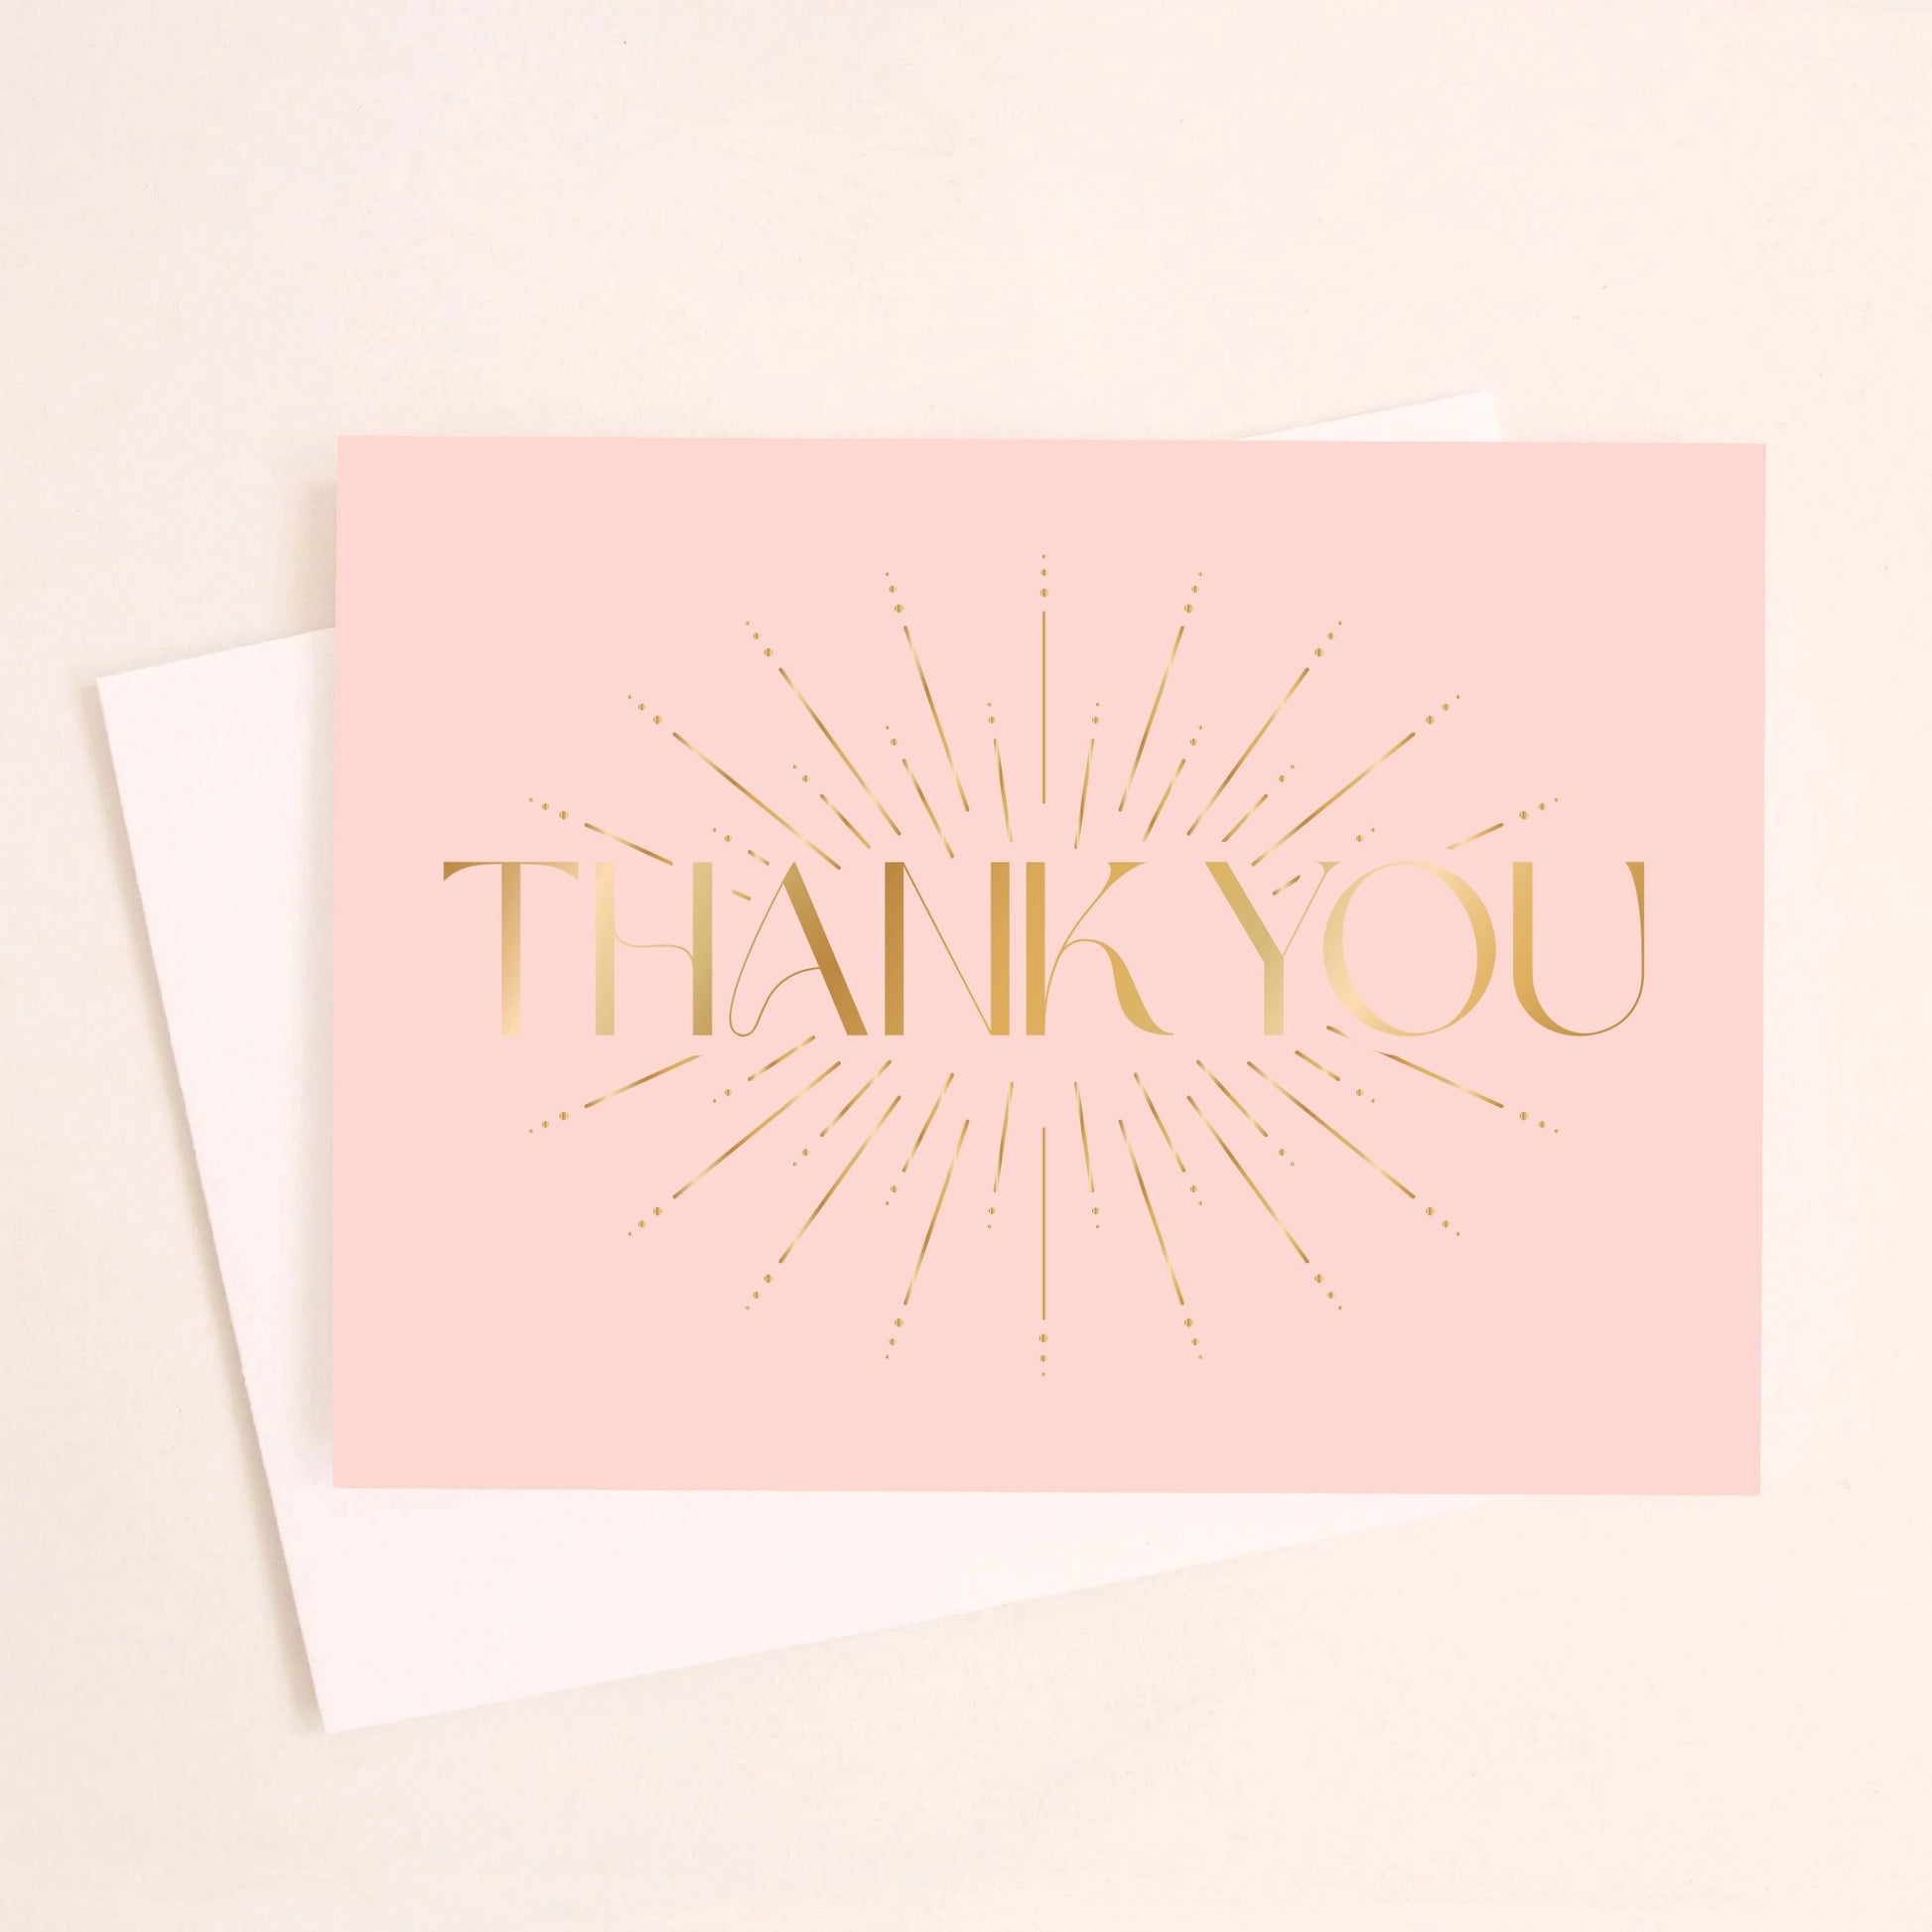 On an ivory background is a light pink card with a gold foil starburst design and text in the center that reads, "Thank You".